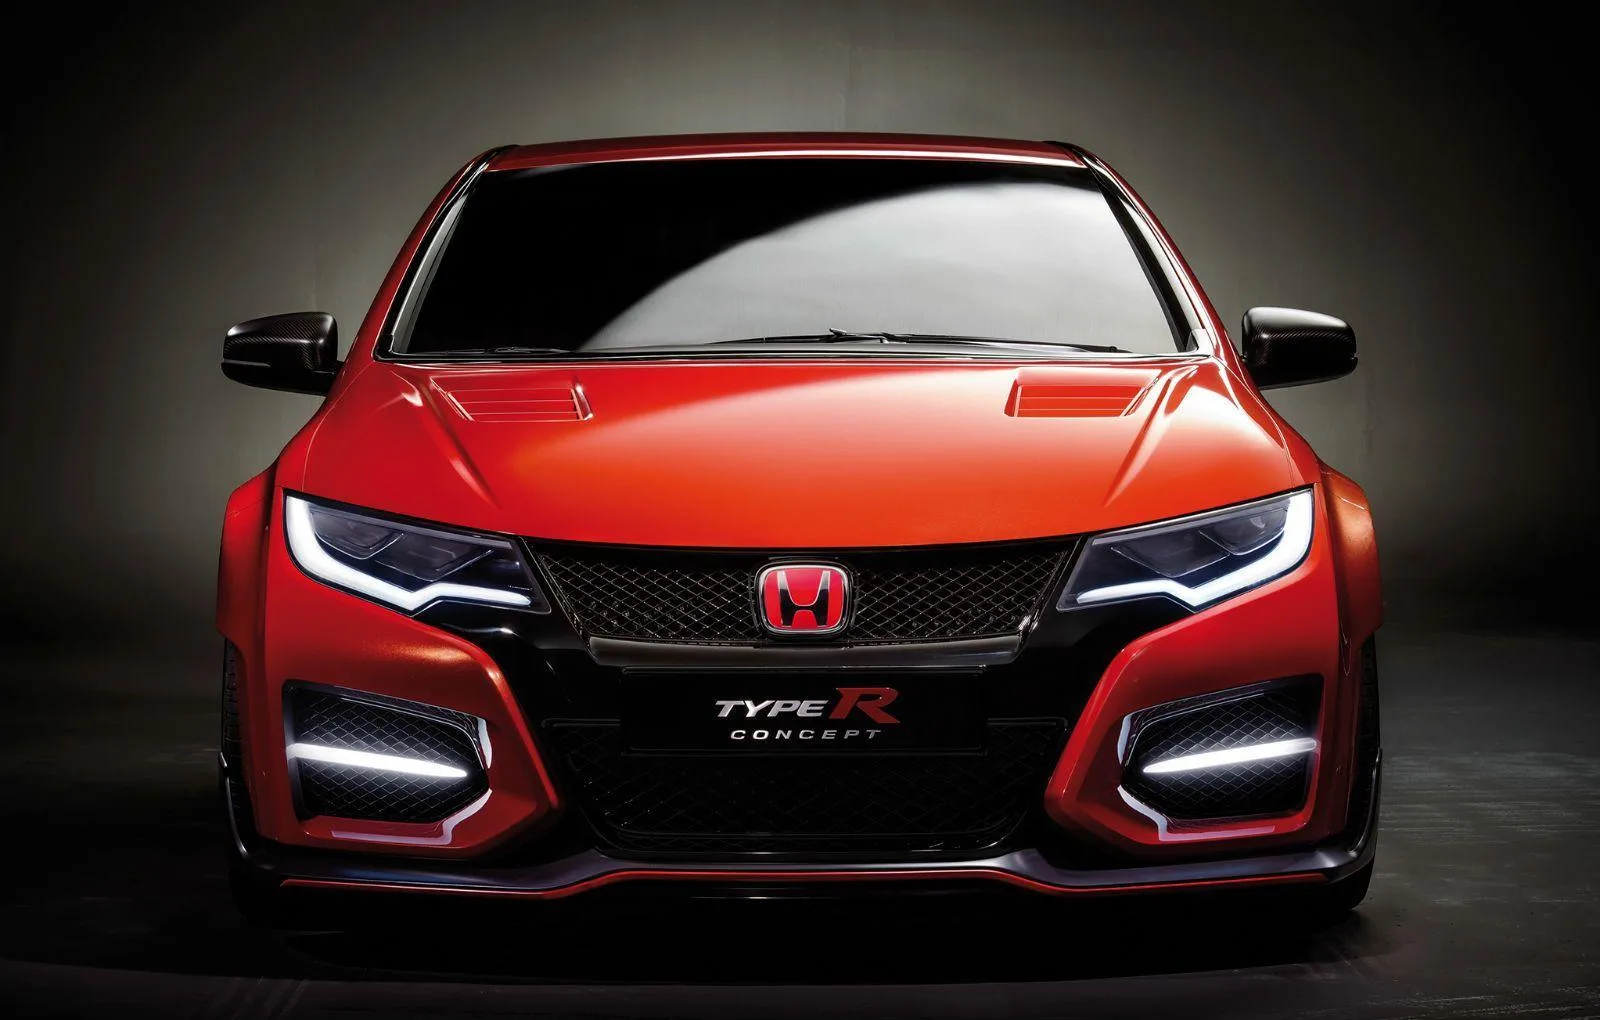 Honda Informs City Purchasers of Excellent News